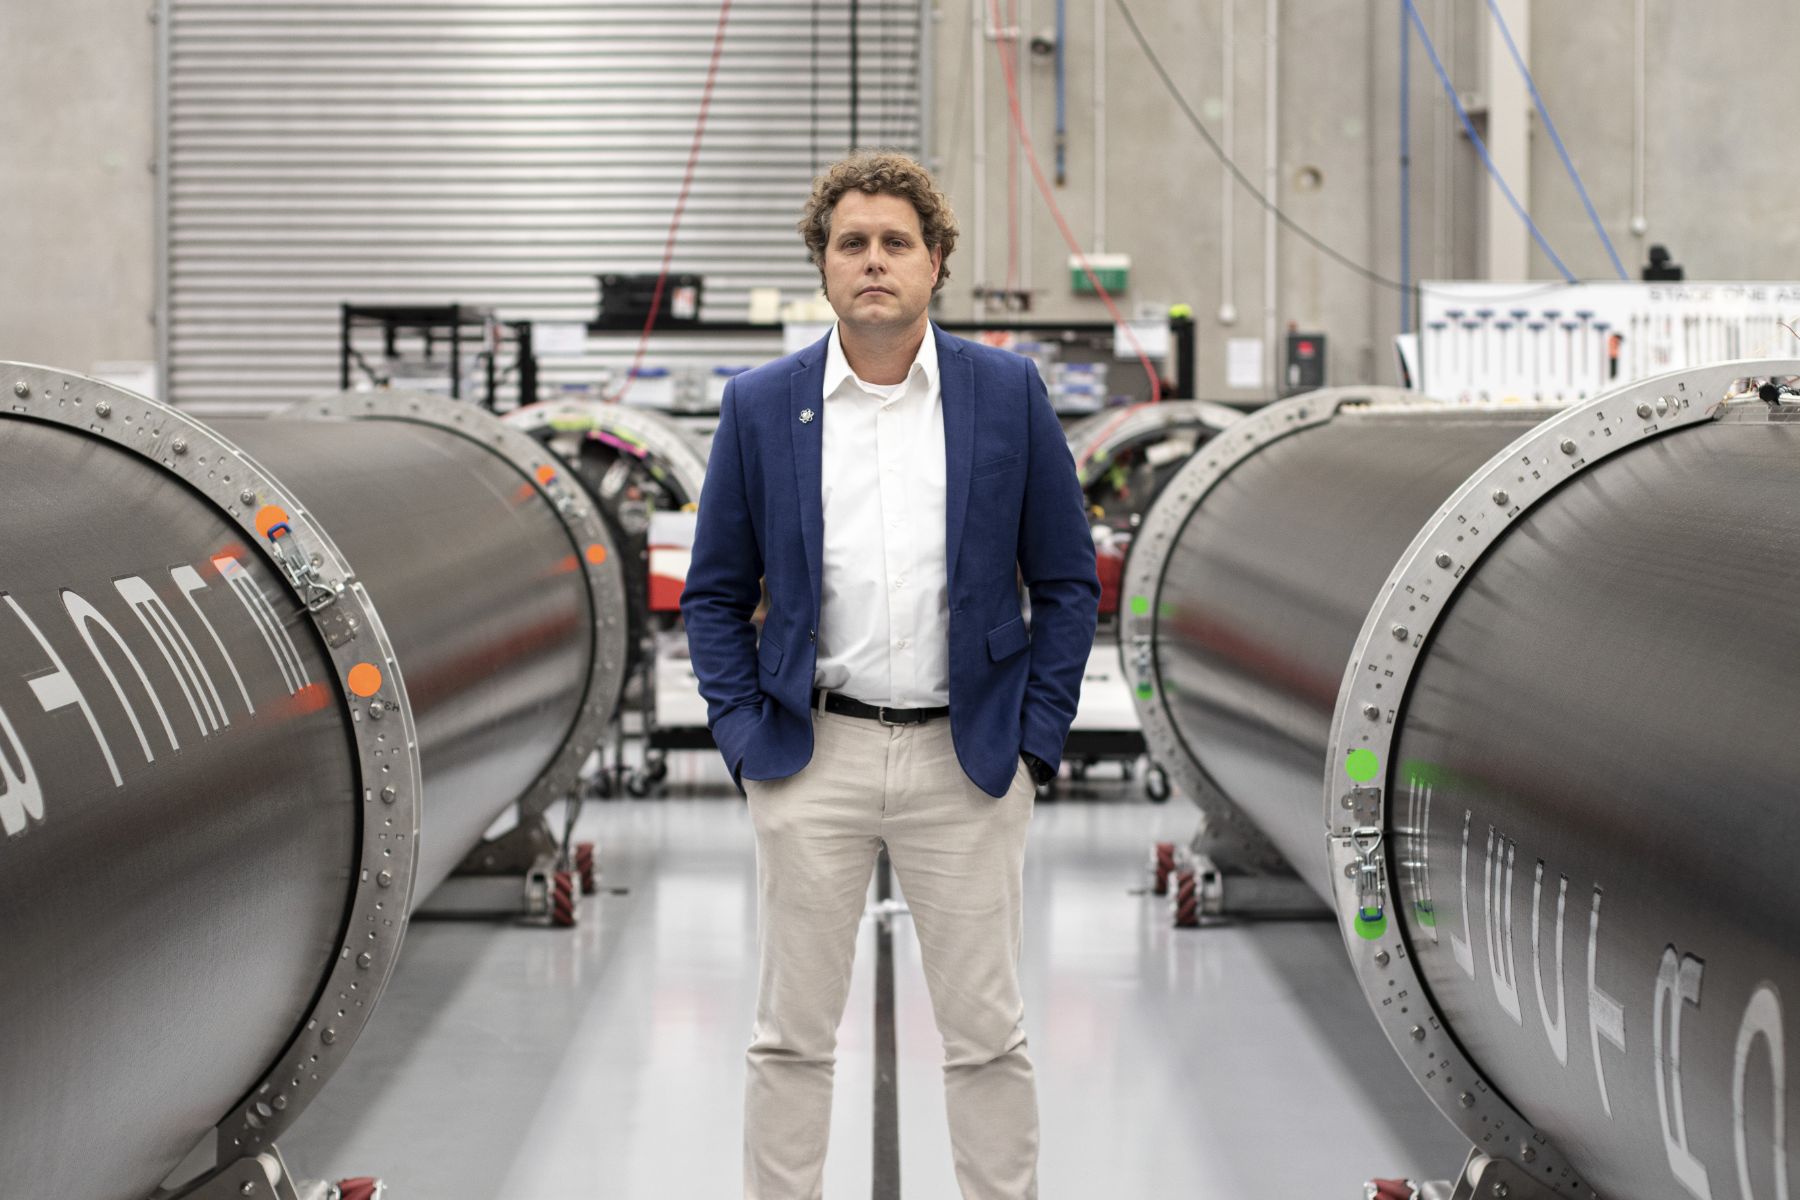 Rocket Lab CEO says companies that don’t reuse rockets will be producing ‘dead-end’ products